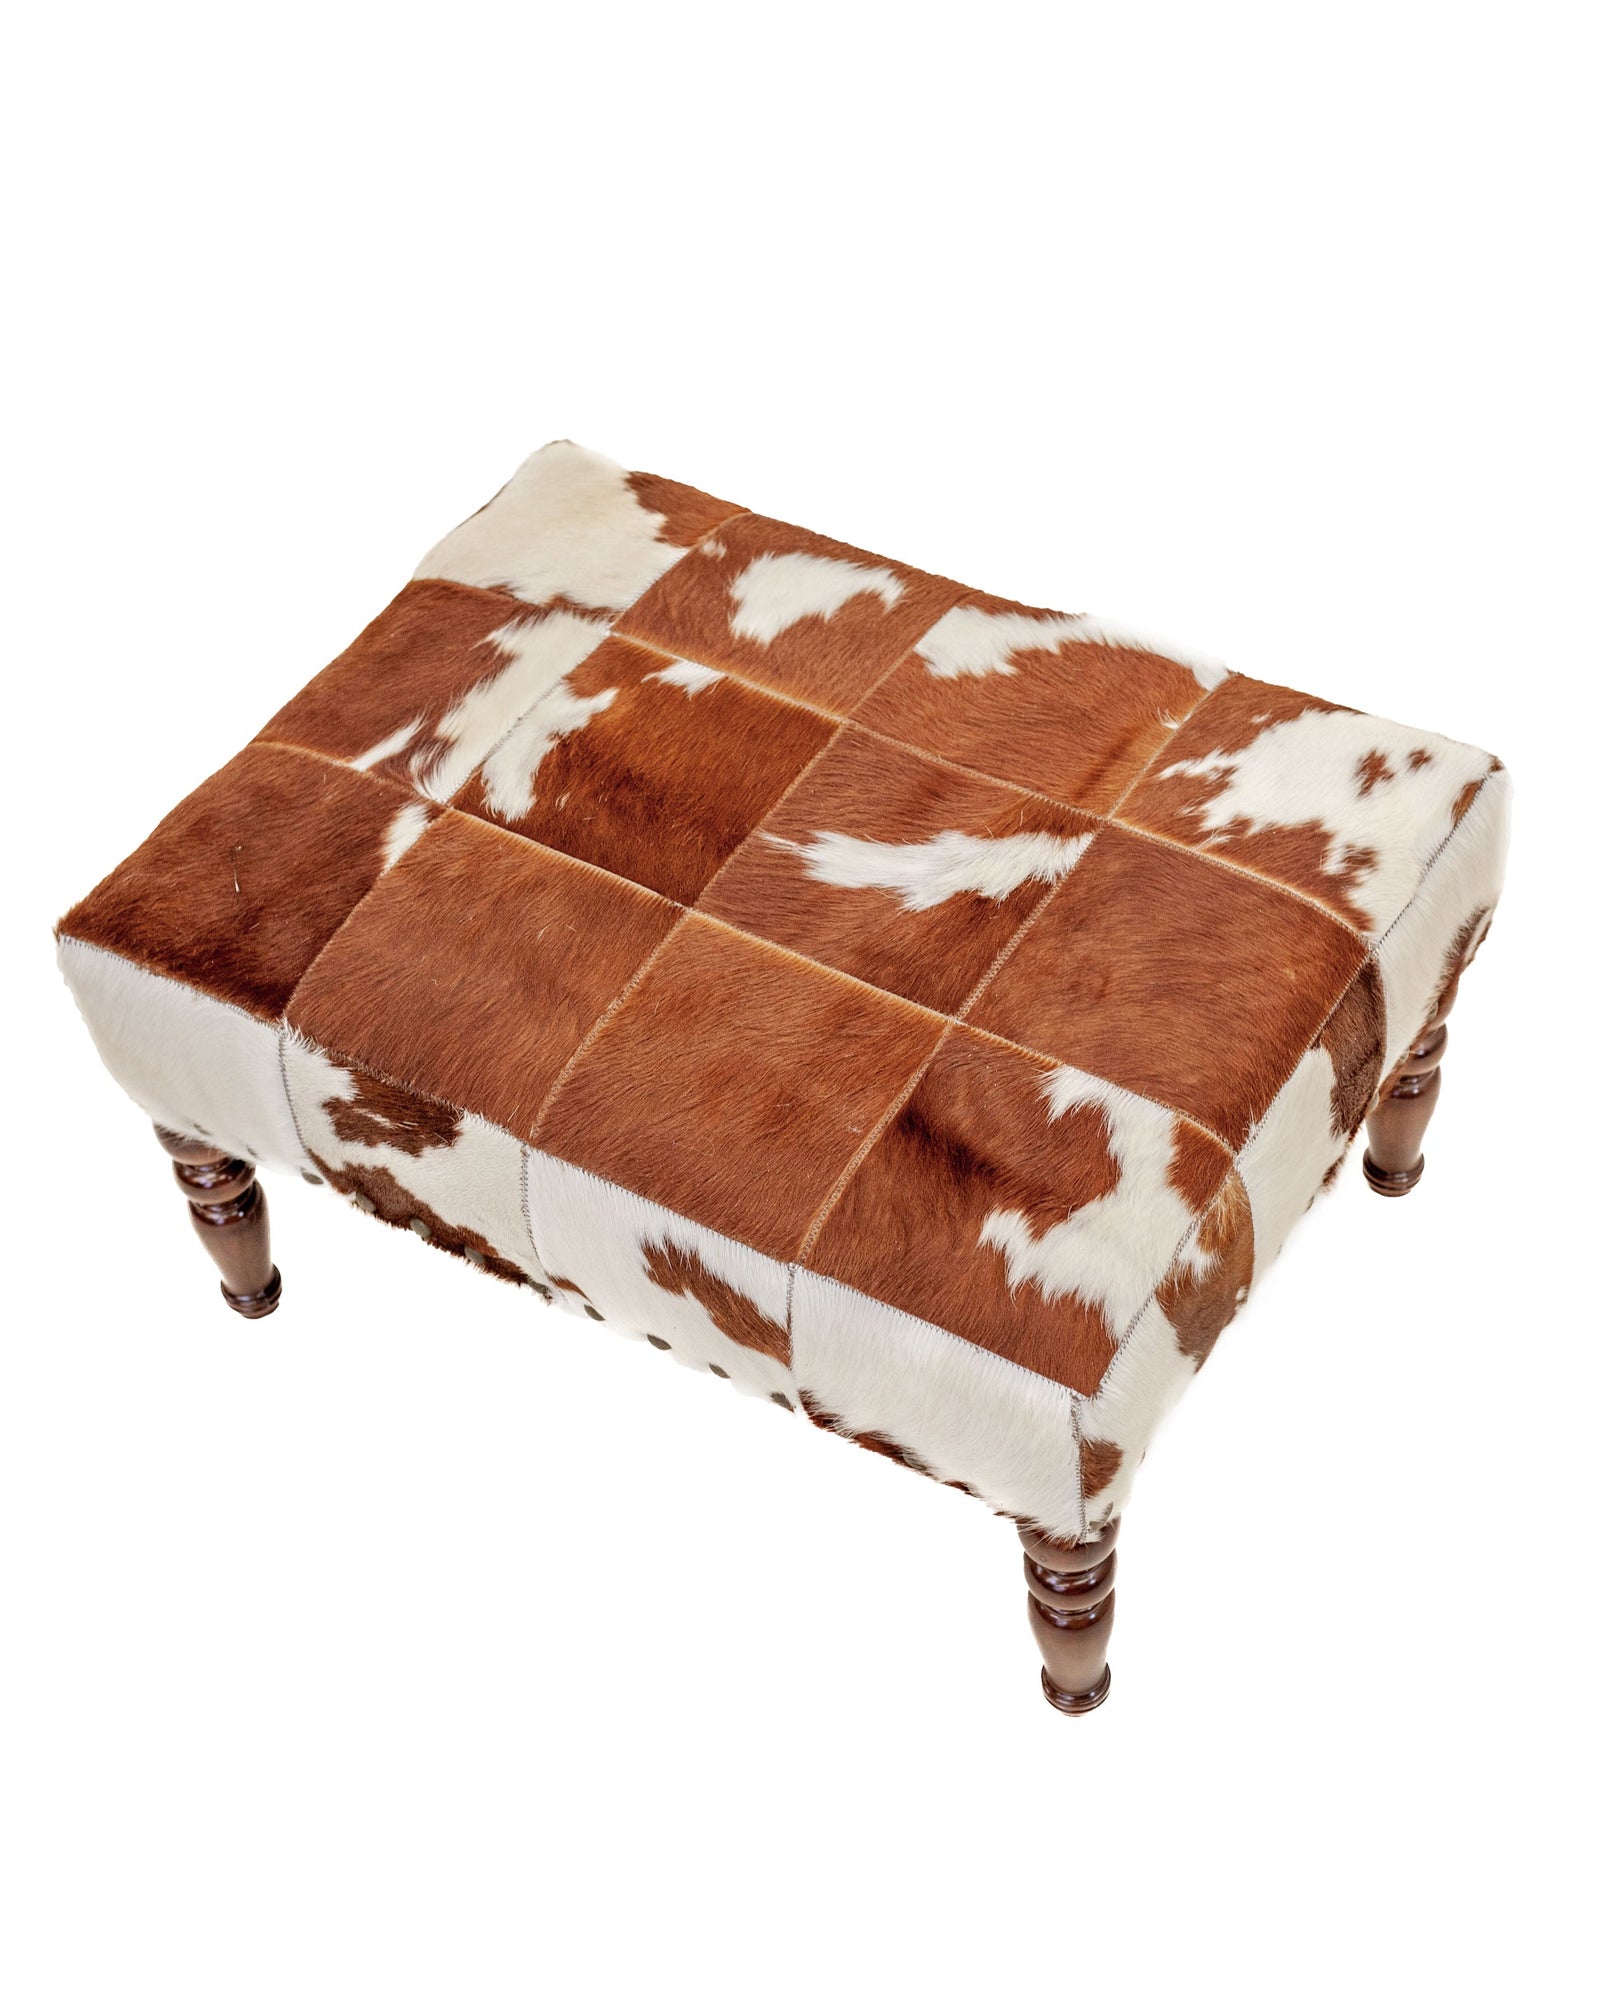 The Cowhide Patchwork Ottoman